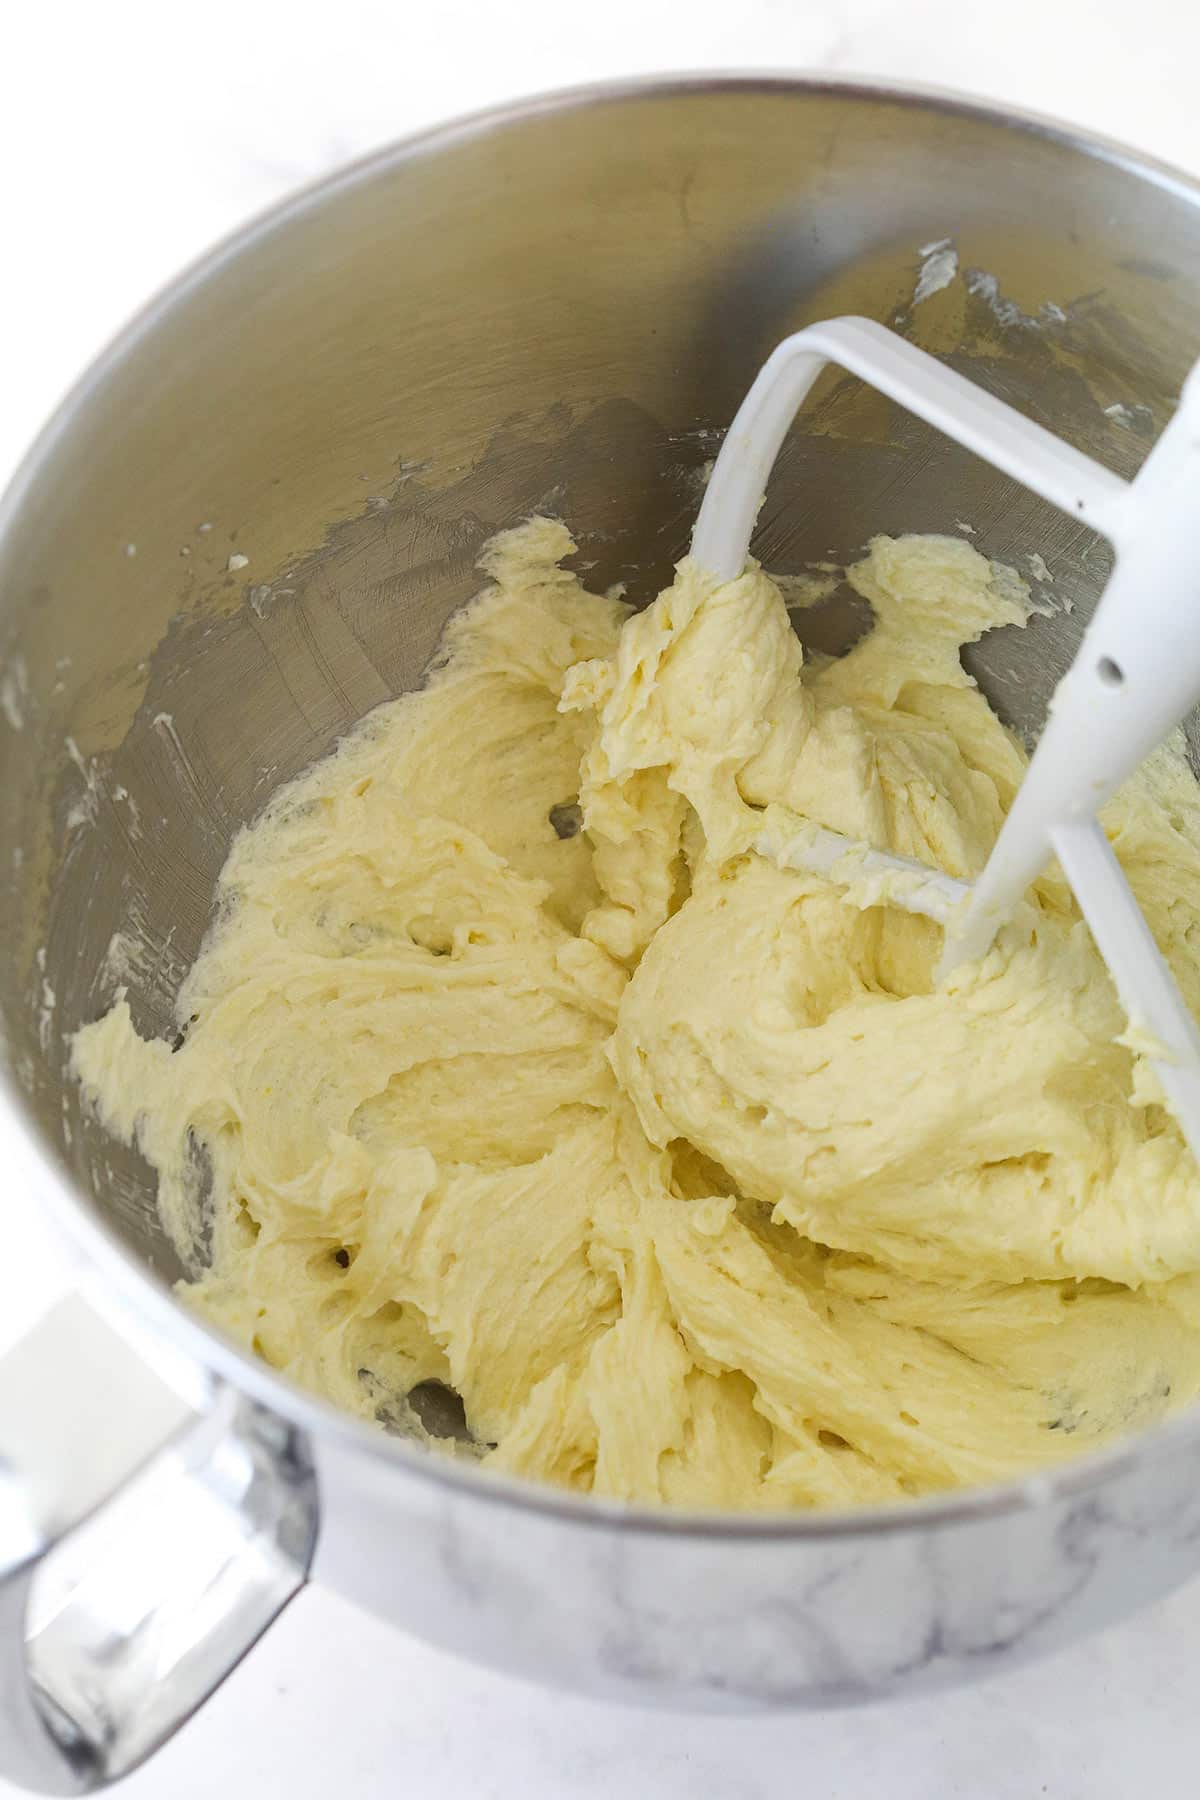 Adding the extracts and egg to the creamed butter.